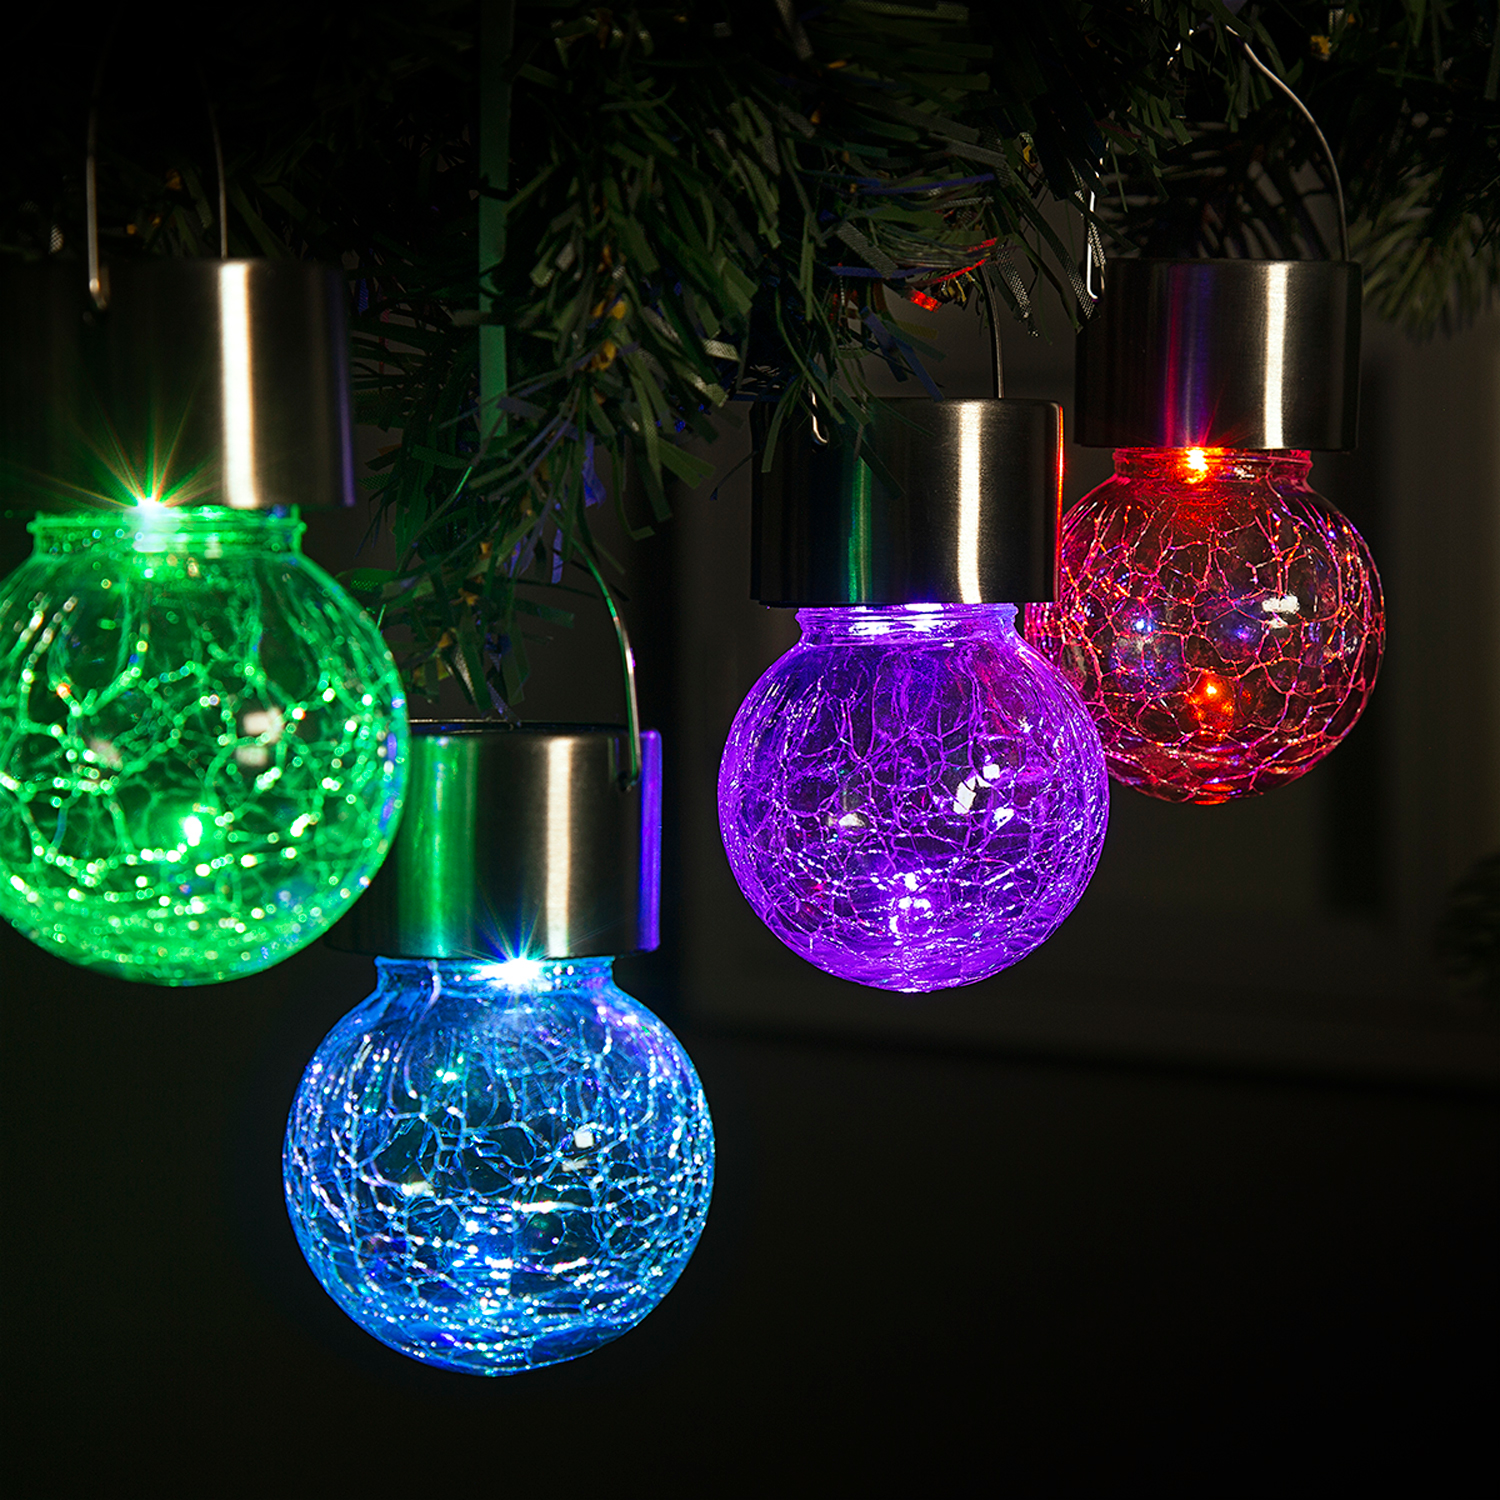 Solpex 8 Pack Hanging Solar Lights,Multi-Color Changing Cracked Glass ...